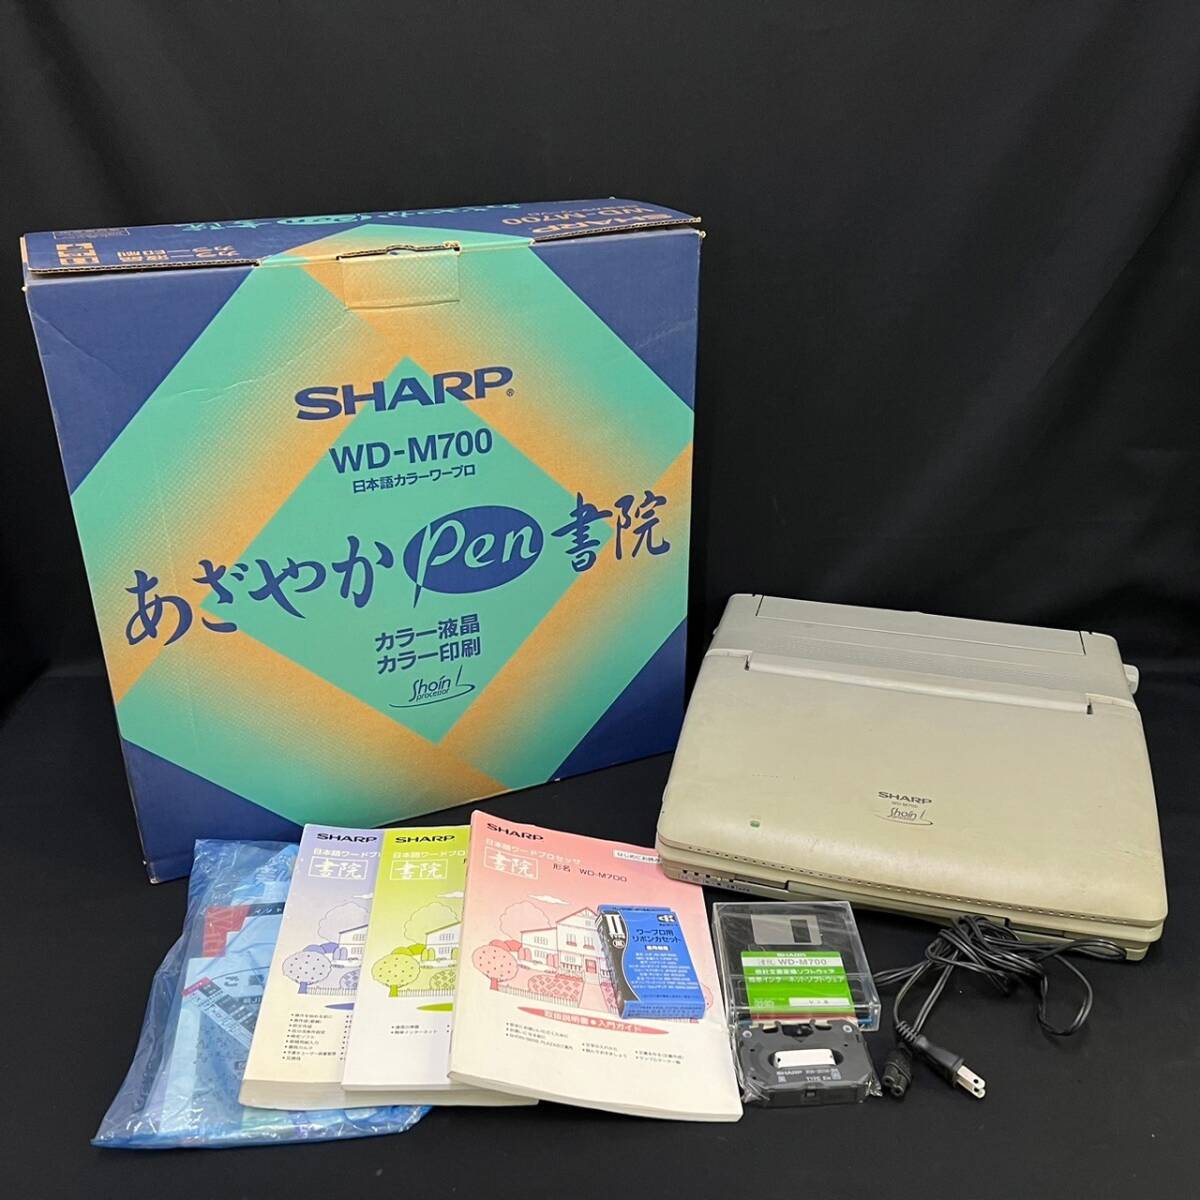 BDg038R 120 box attaching SHARP WD-M700 Japanese color word-processor ....Pen paper . color liquid crystal instructions other company document conversion software set summarize 